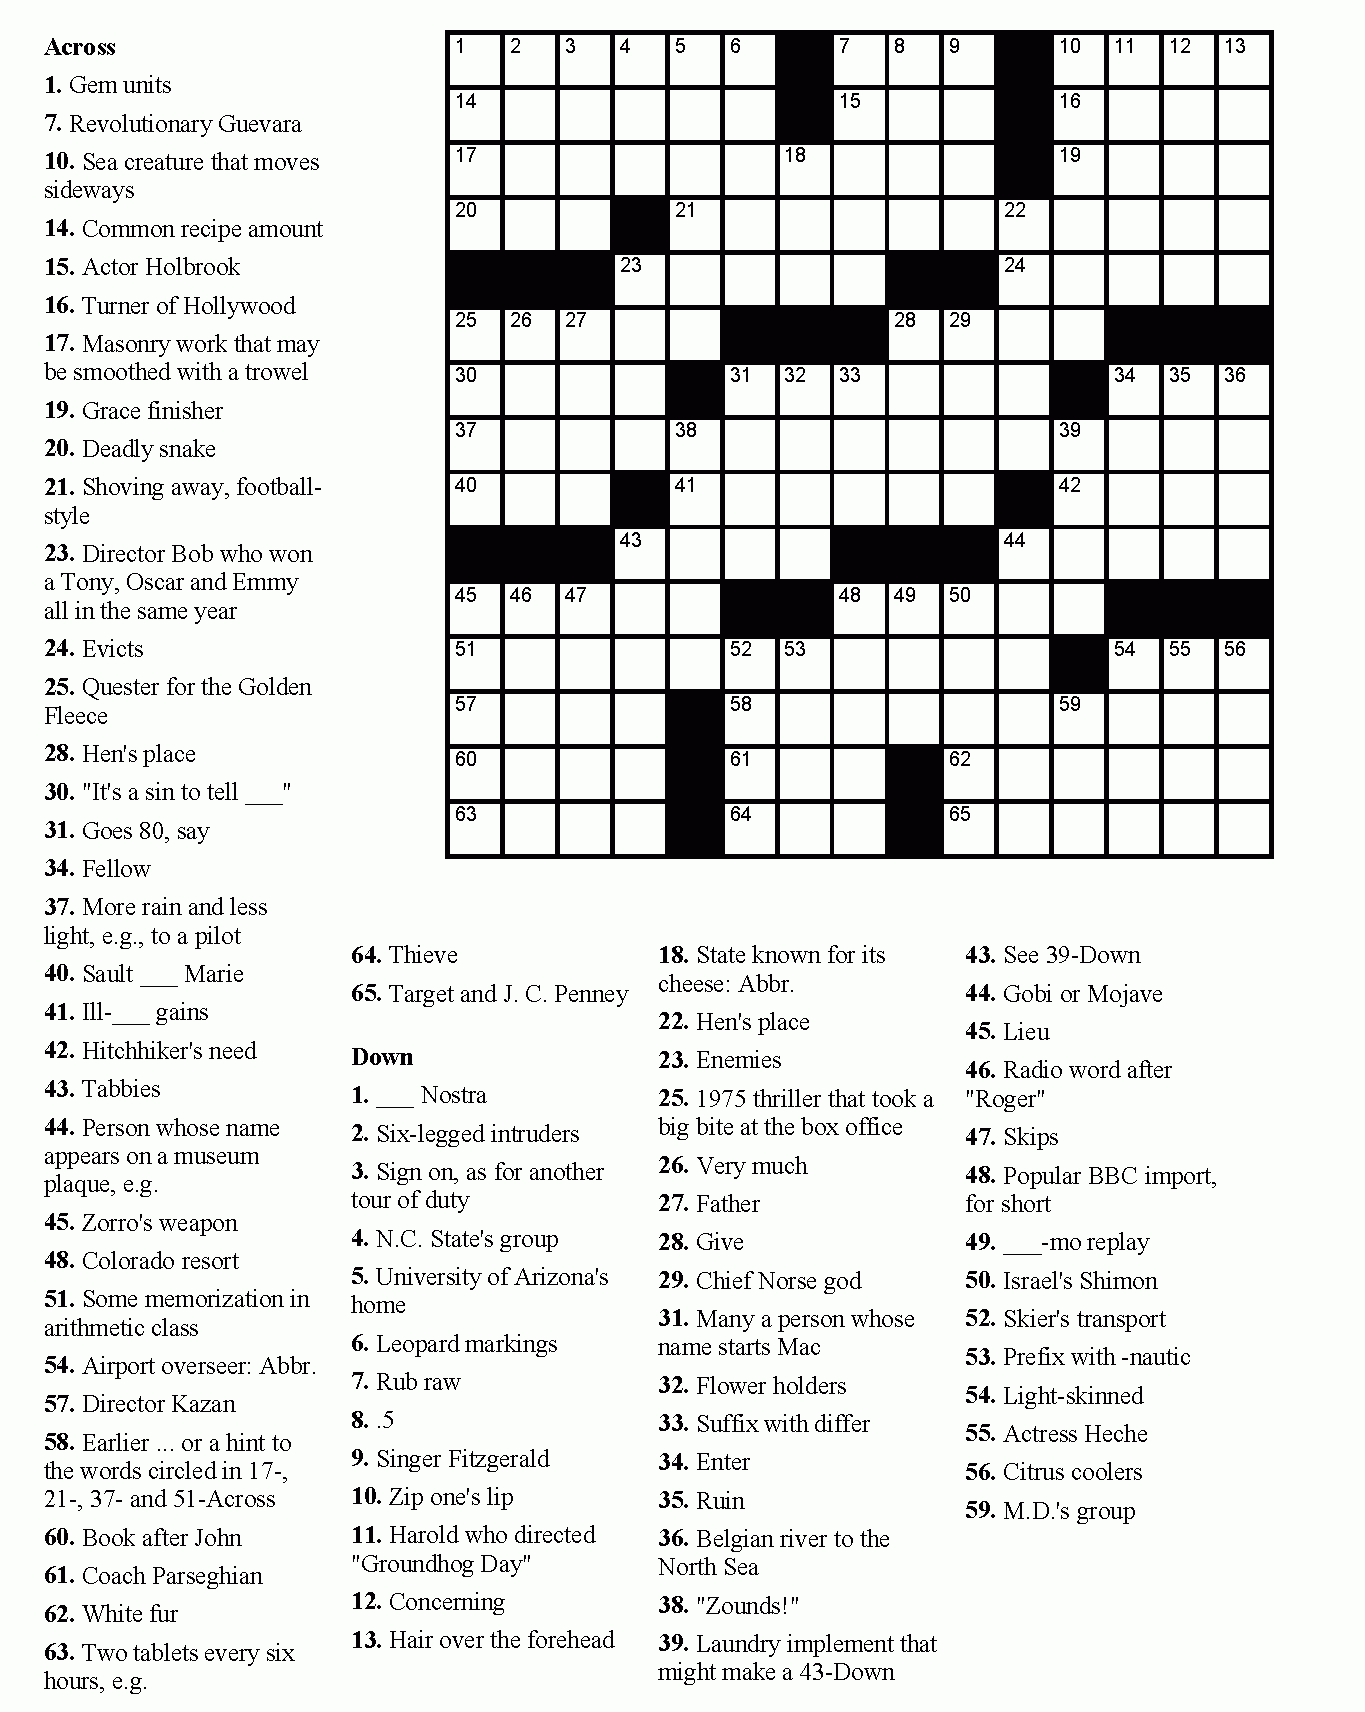 Free Printable Crossword Puzzles Easy For Adults | My Board - Free Printable Crossword Puzzles